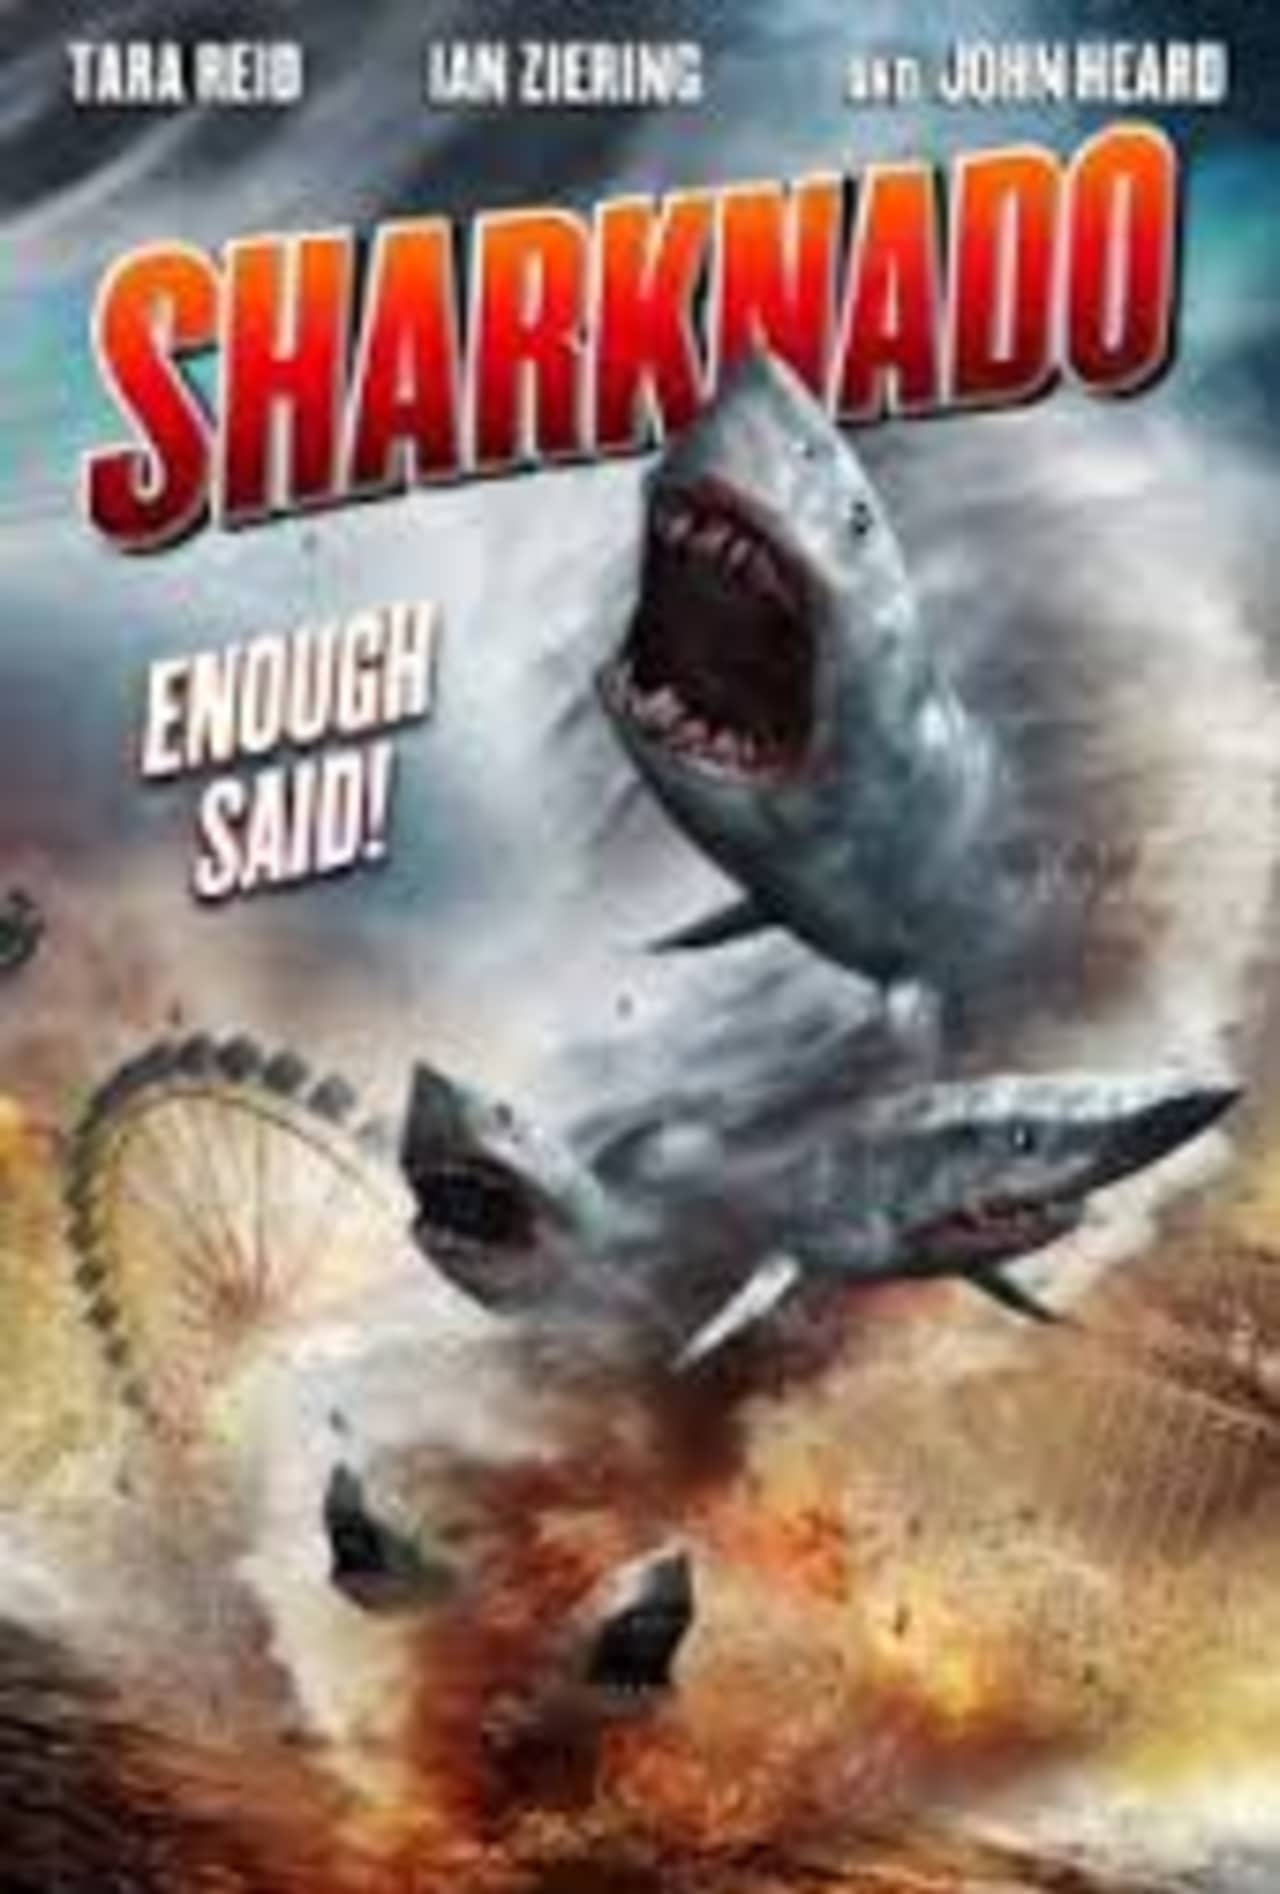 There will be a showing of "Sharknado" at the Briarcliff Manor Public Library on Friday, Feb. 14.